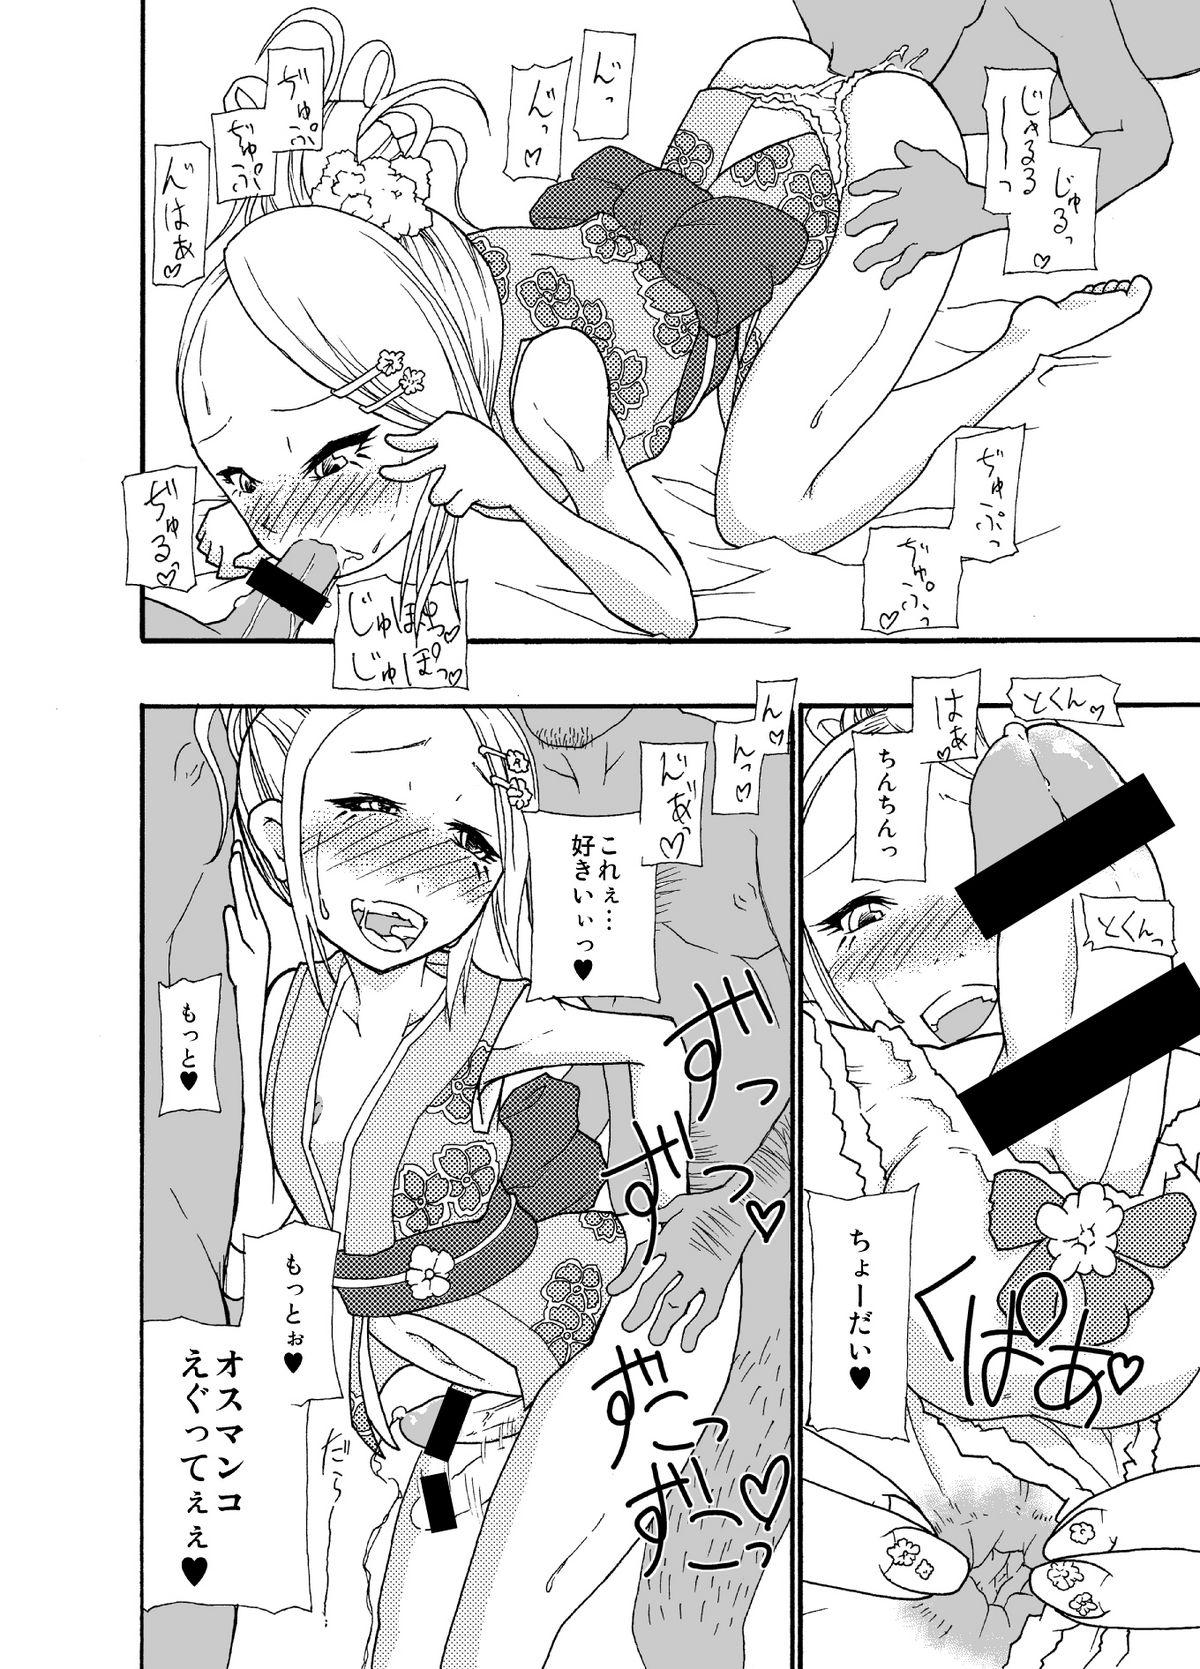 Tgirl 砂上の城・麗 Castle・imitation.0 Jerkoff - Page 3